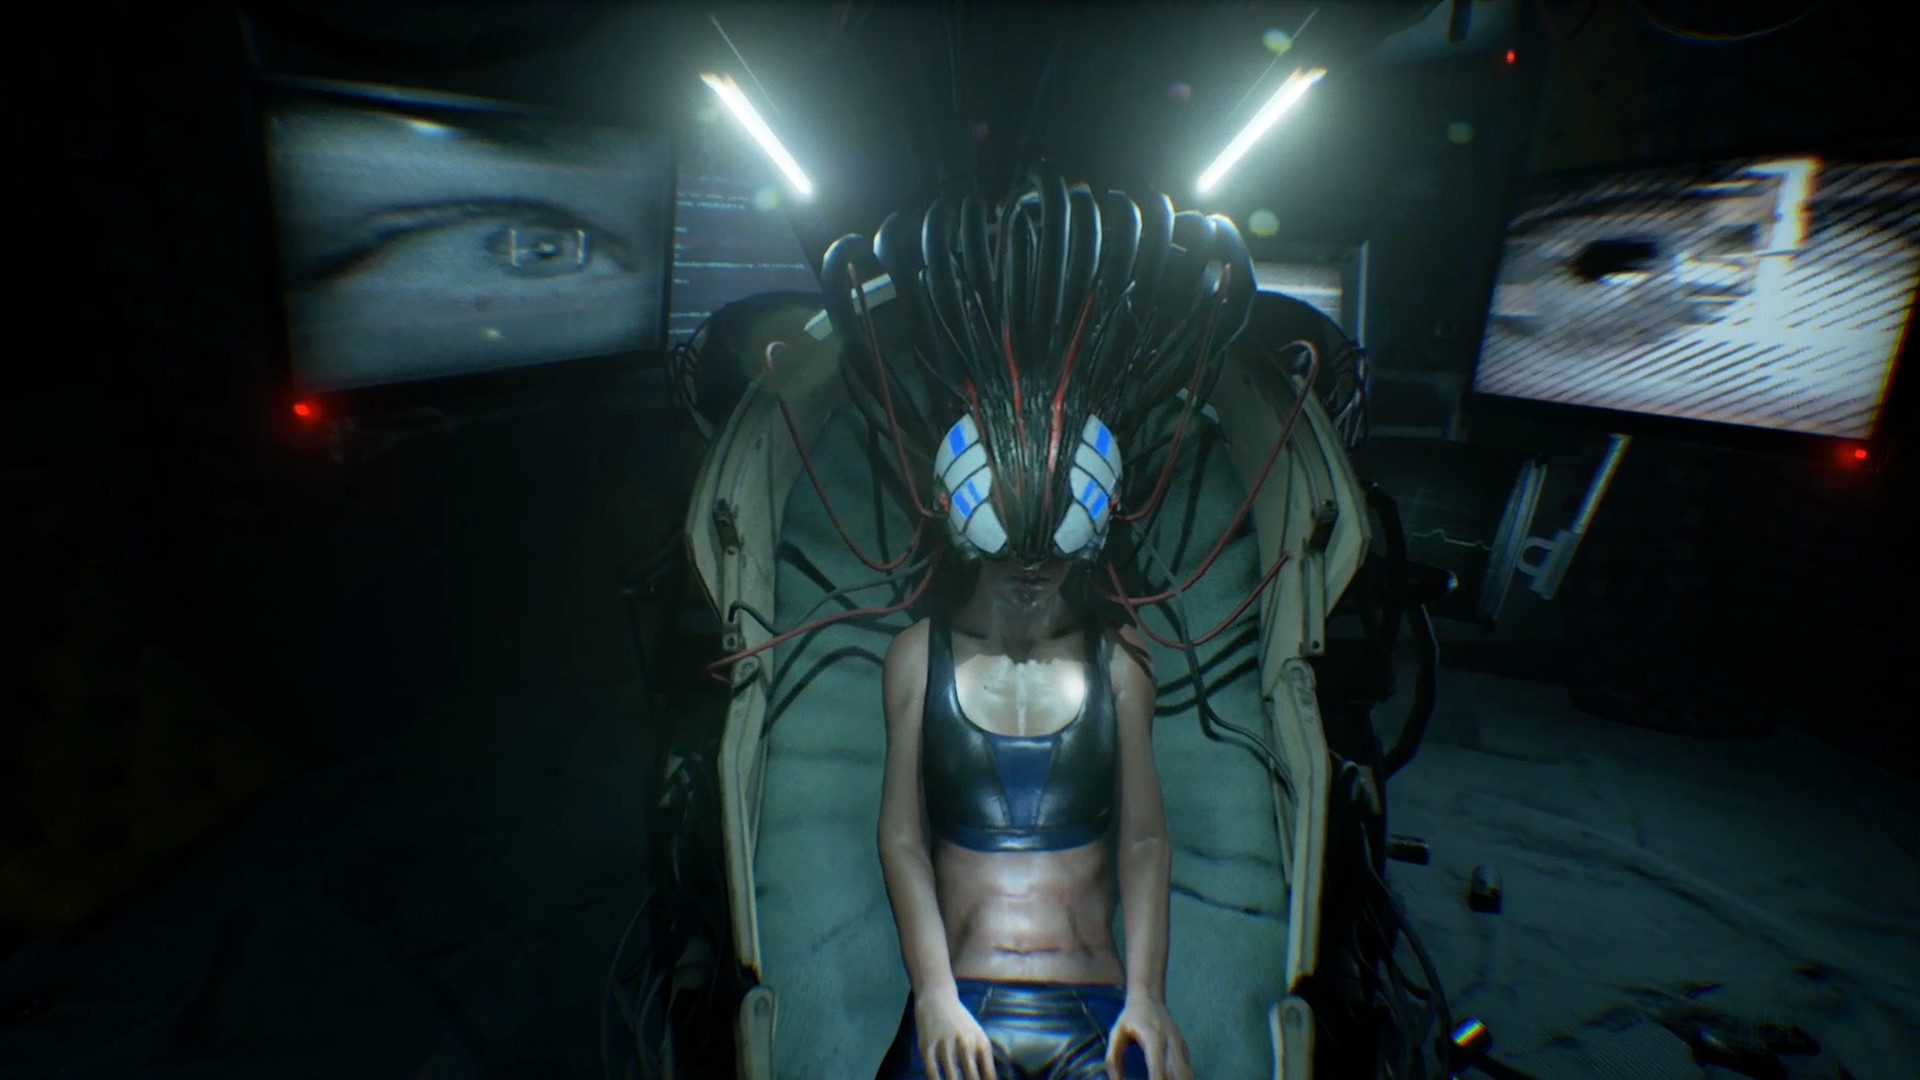 Cyberpunk Horror Game “Observer” Heads to Switch